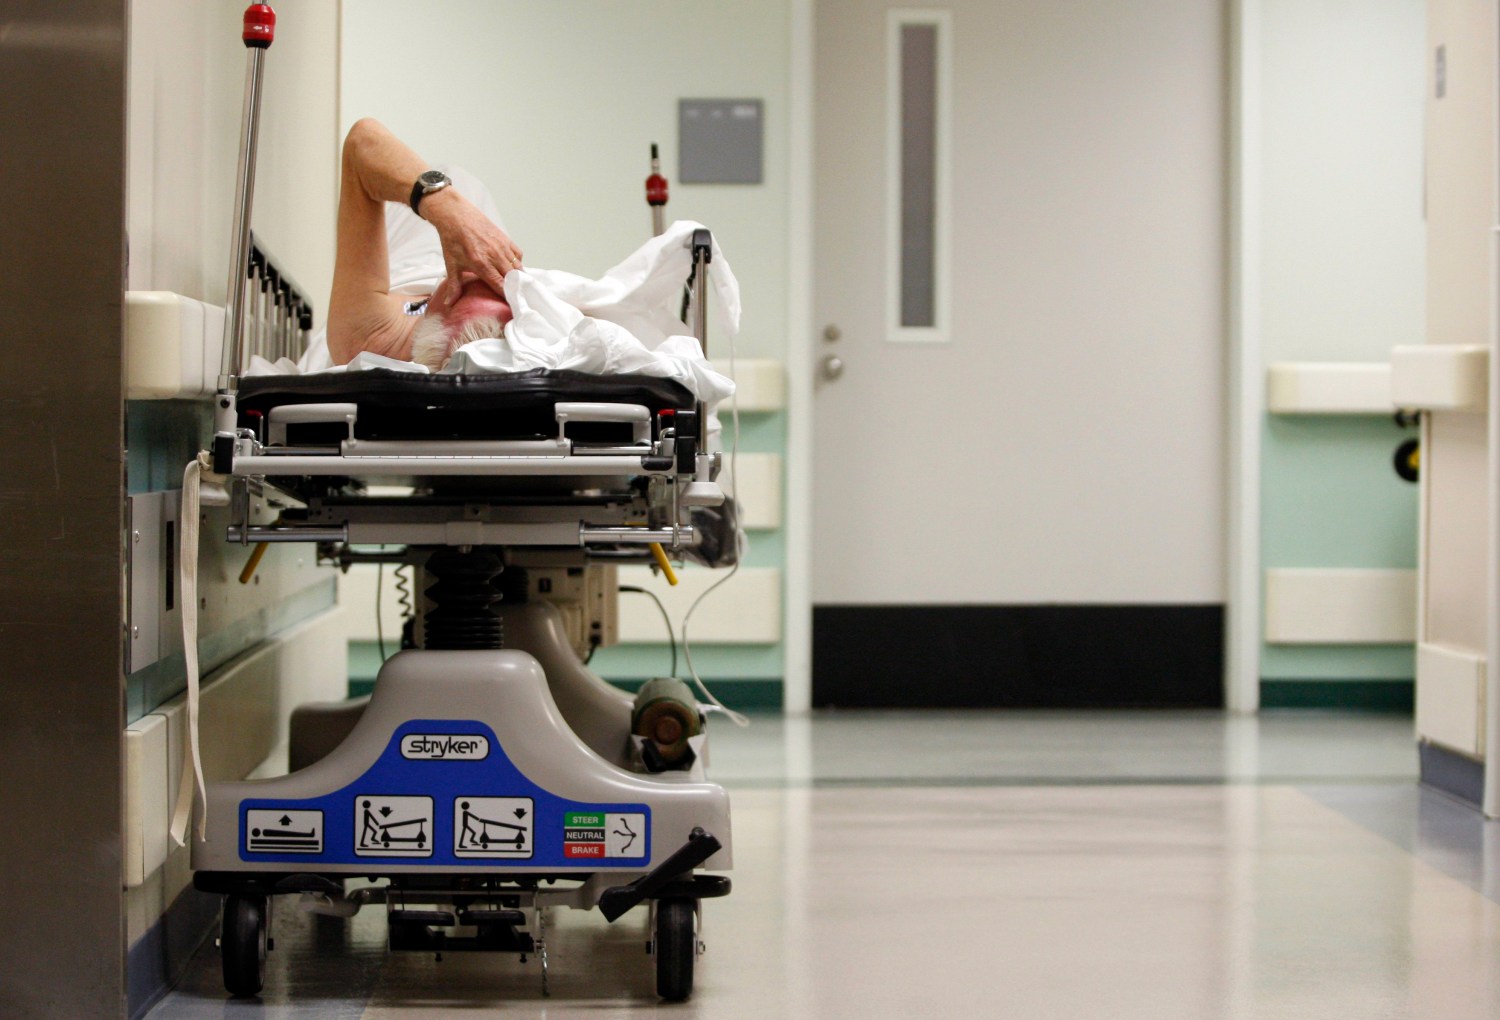 A patient lies in a hospital bed in a hospital hallway